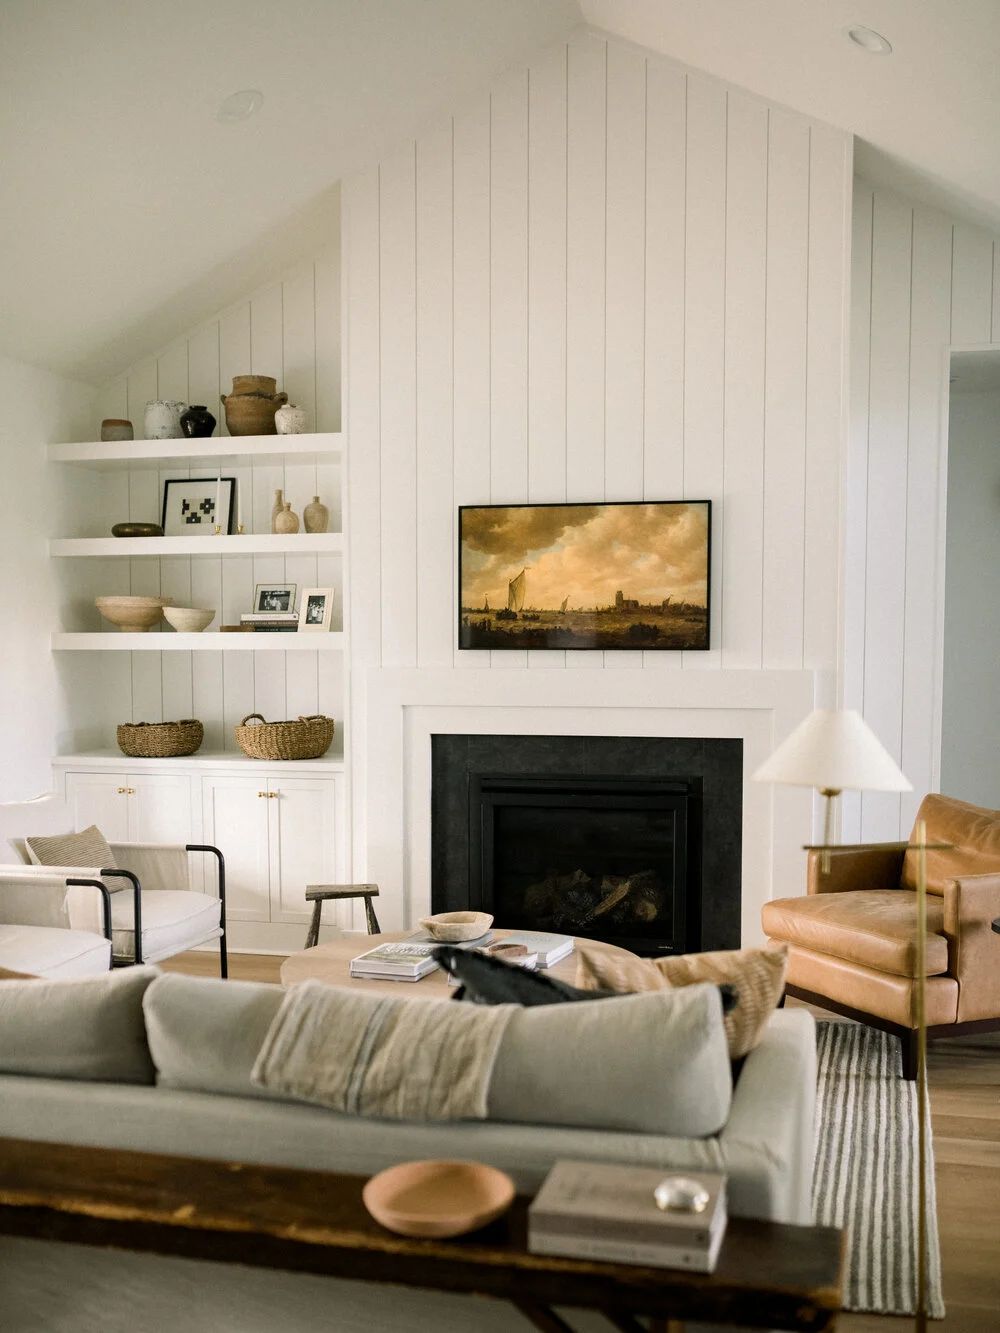 Fireplace with Built-Ins on One Side